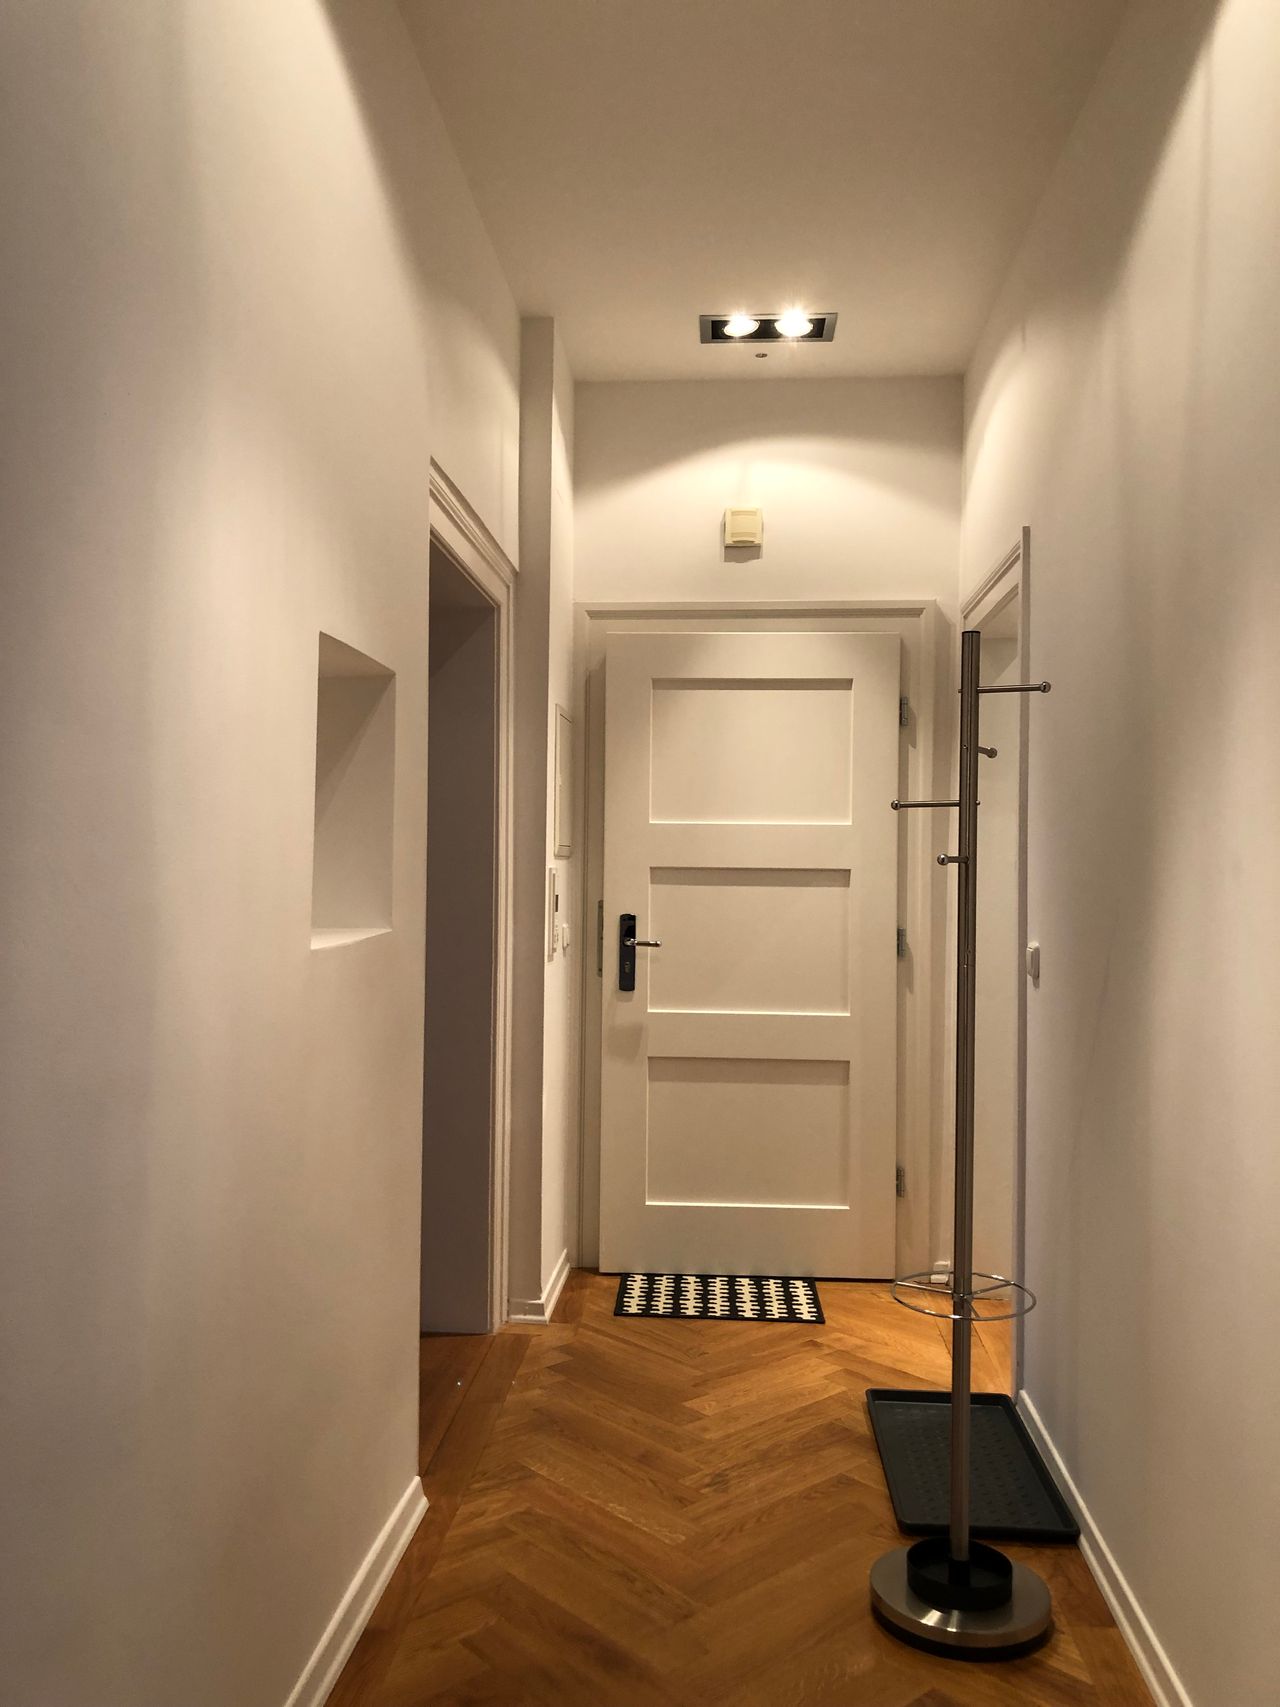 Top newly renovated flat in the Glockenbach quarters